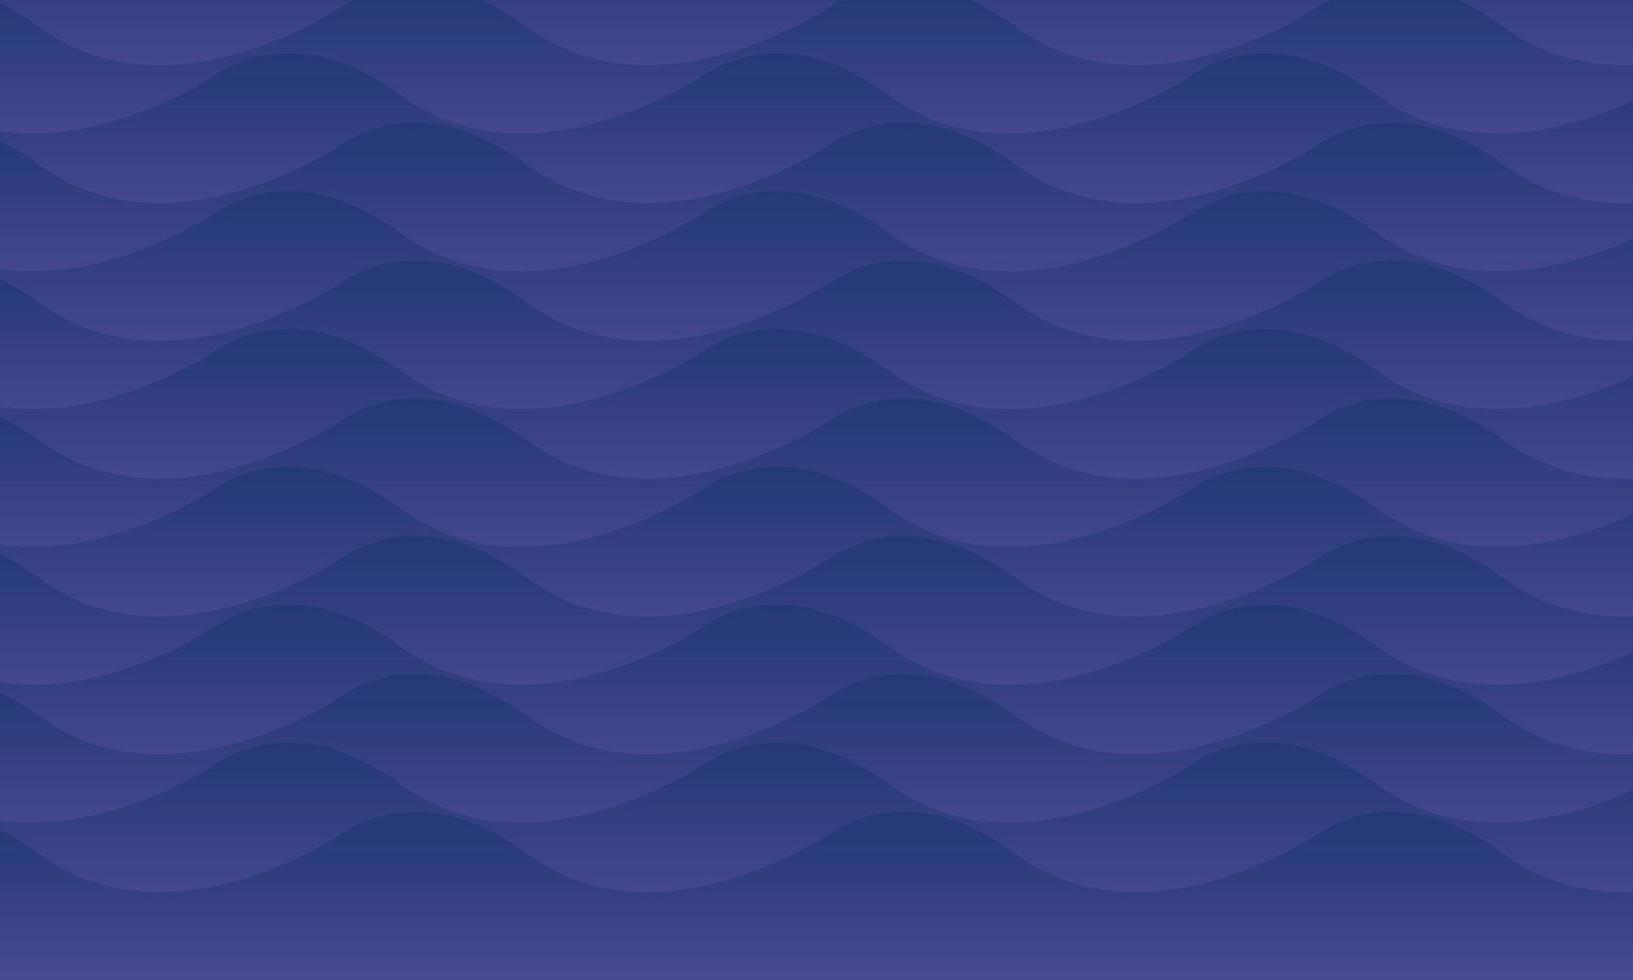 abstract wavy background vector